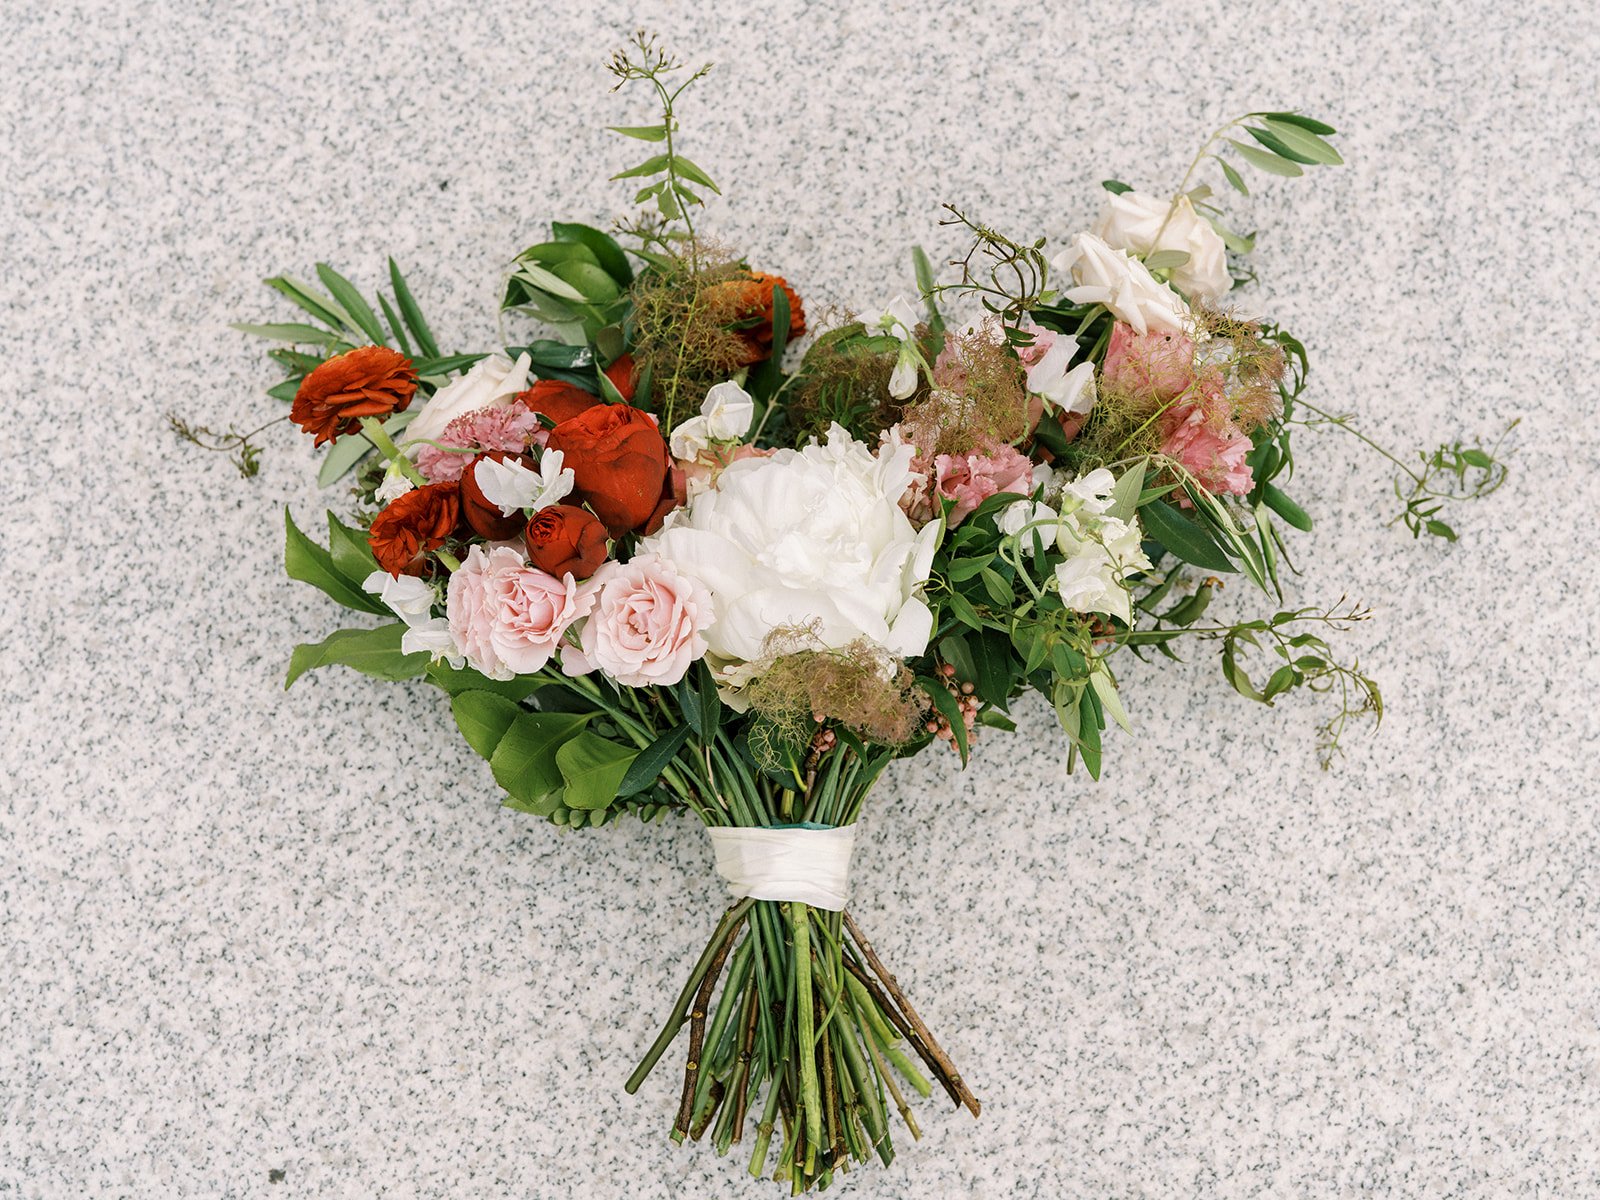 A midsummer nights dream bridal bouquet filled with ranunculus, peonies, garden roses, sweet pea and jasmine vine. Designed by Rosemary and Finch in Nashville, TN.